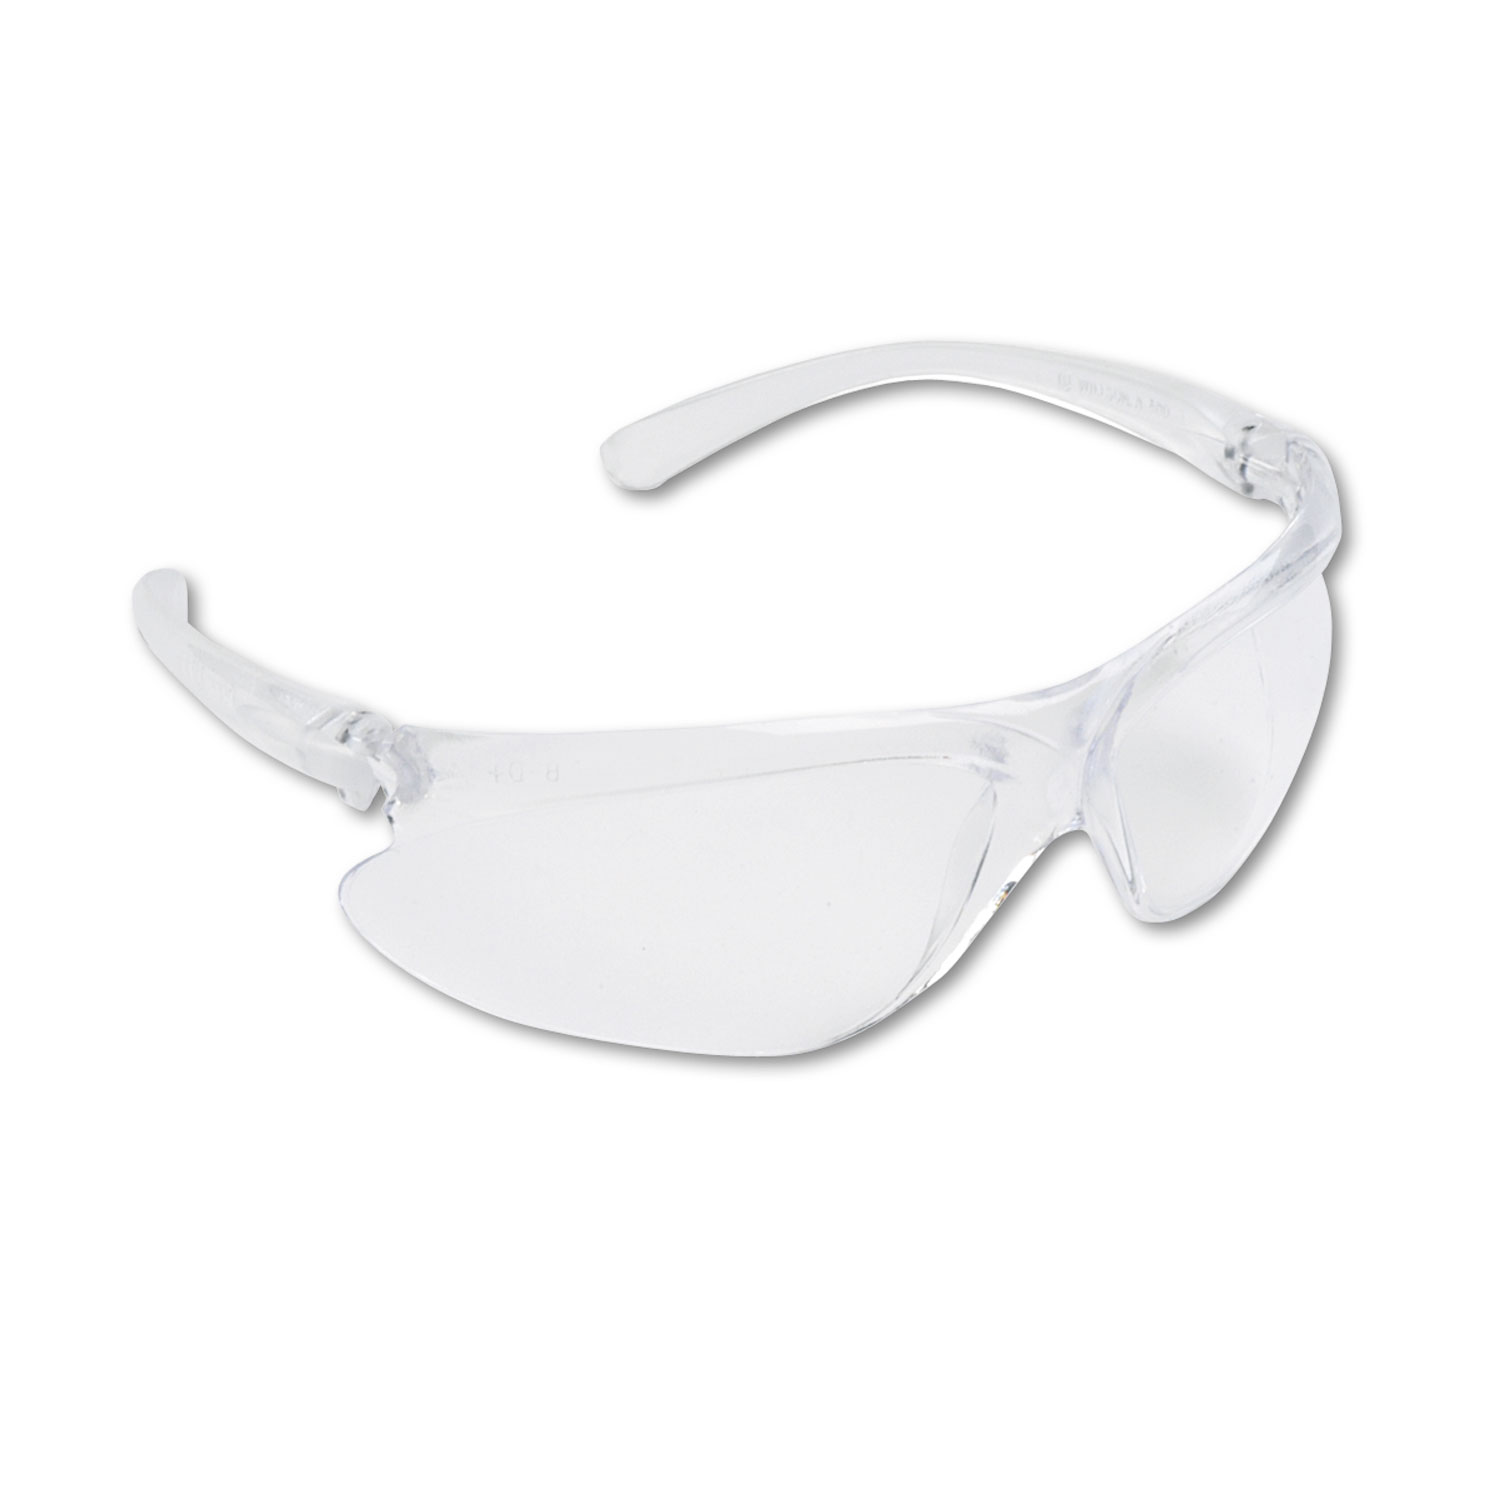 Spartan 400 Series Wraparound Safety Glasses, Clear Plastic Frame, Clear Lens